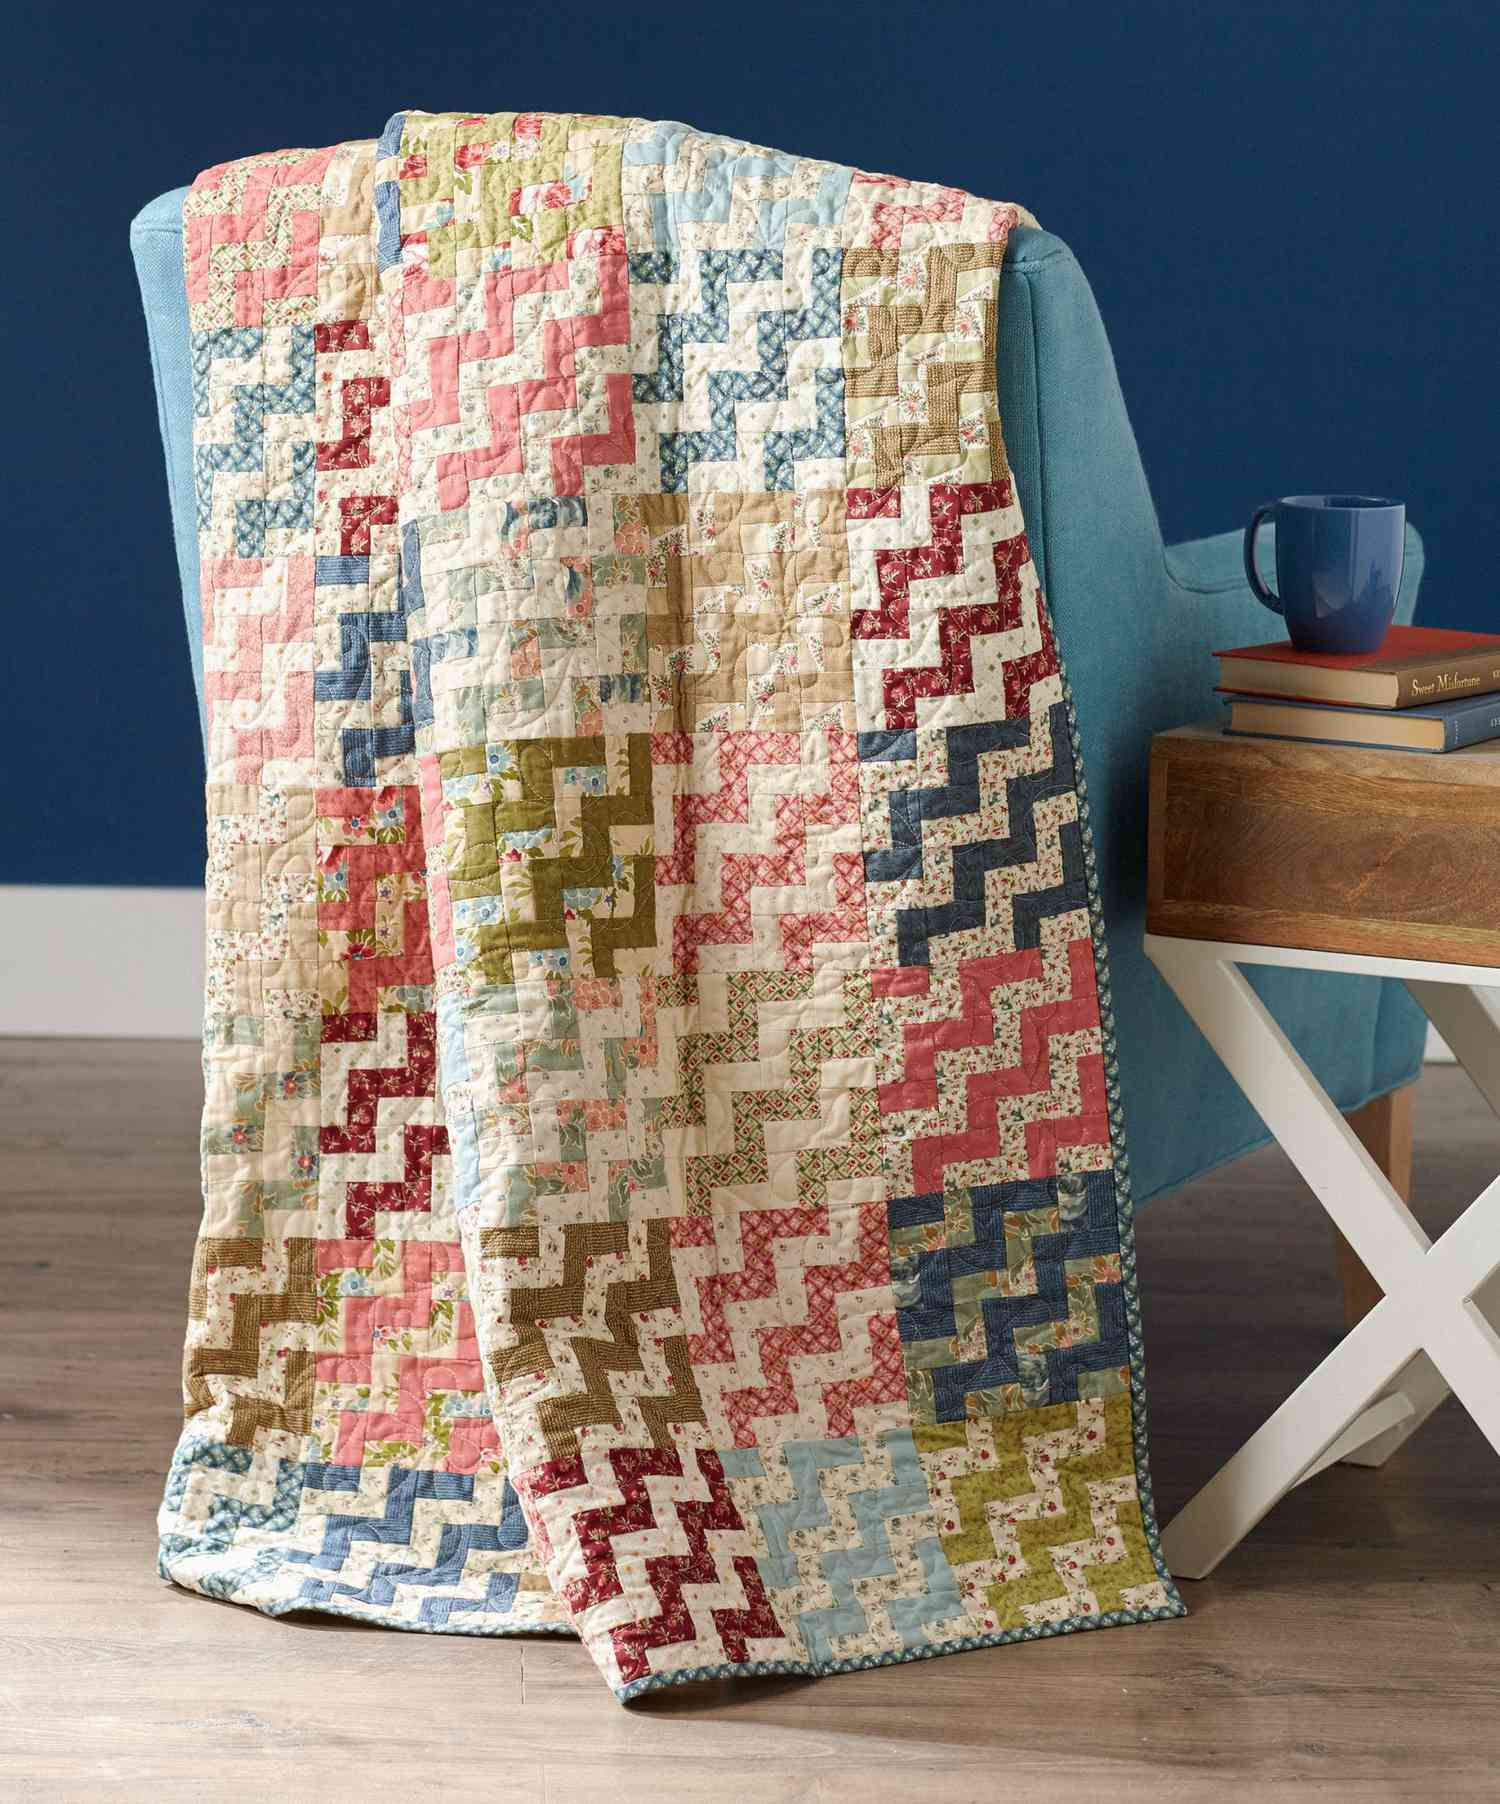 Quilt for Sale Winter Wall Hanging Quilt